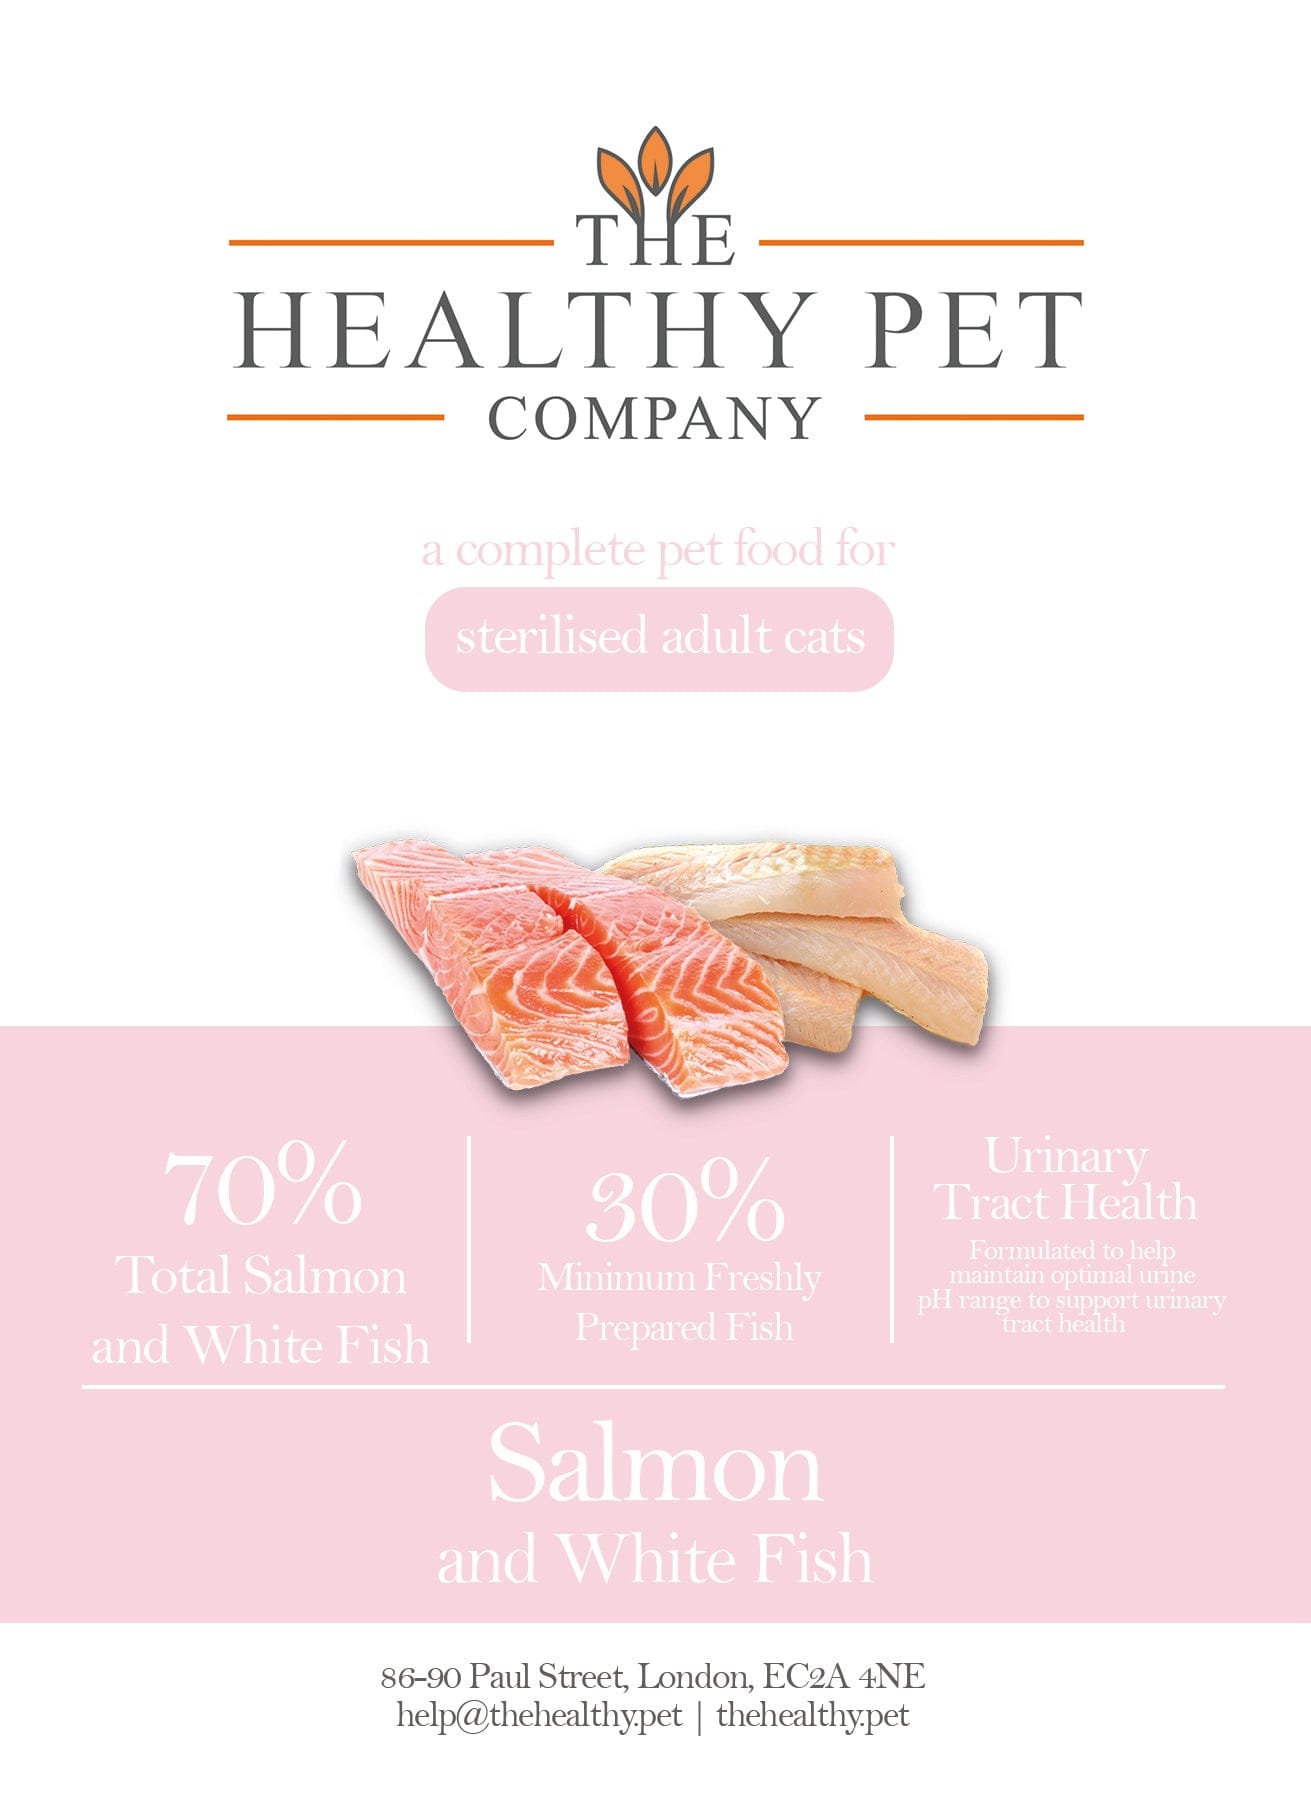 The Healthy Pet Company Complete Meal - Salmon & White Fish for Sterilised Adult Cats - The Healthy Pet Company